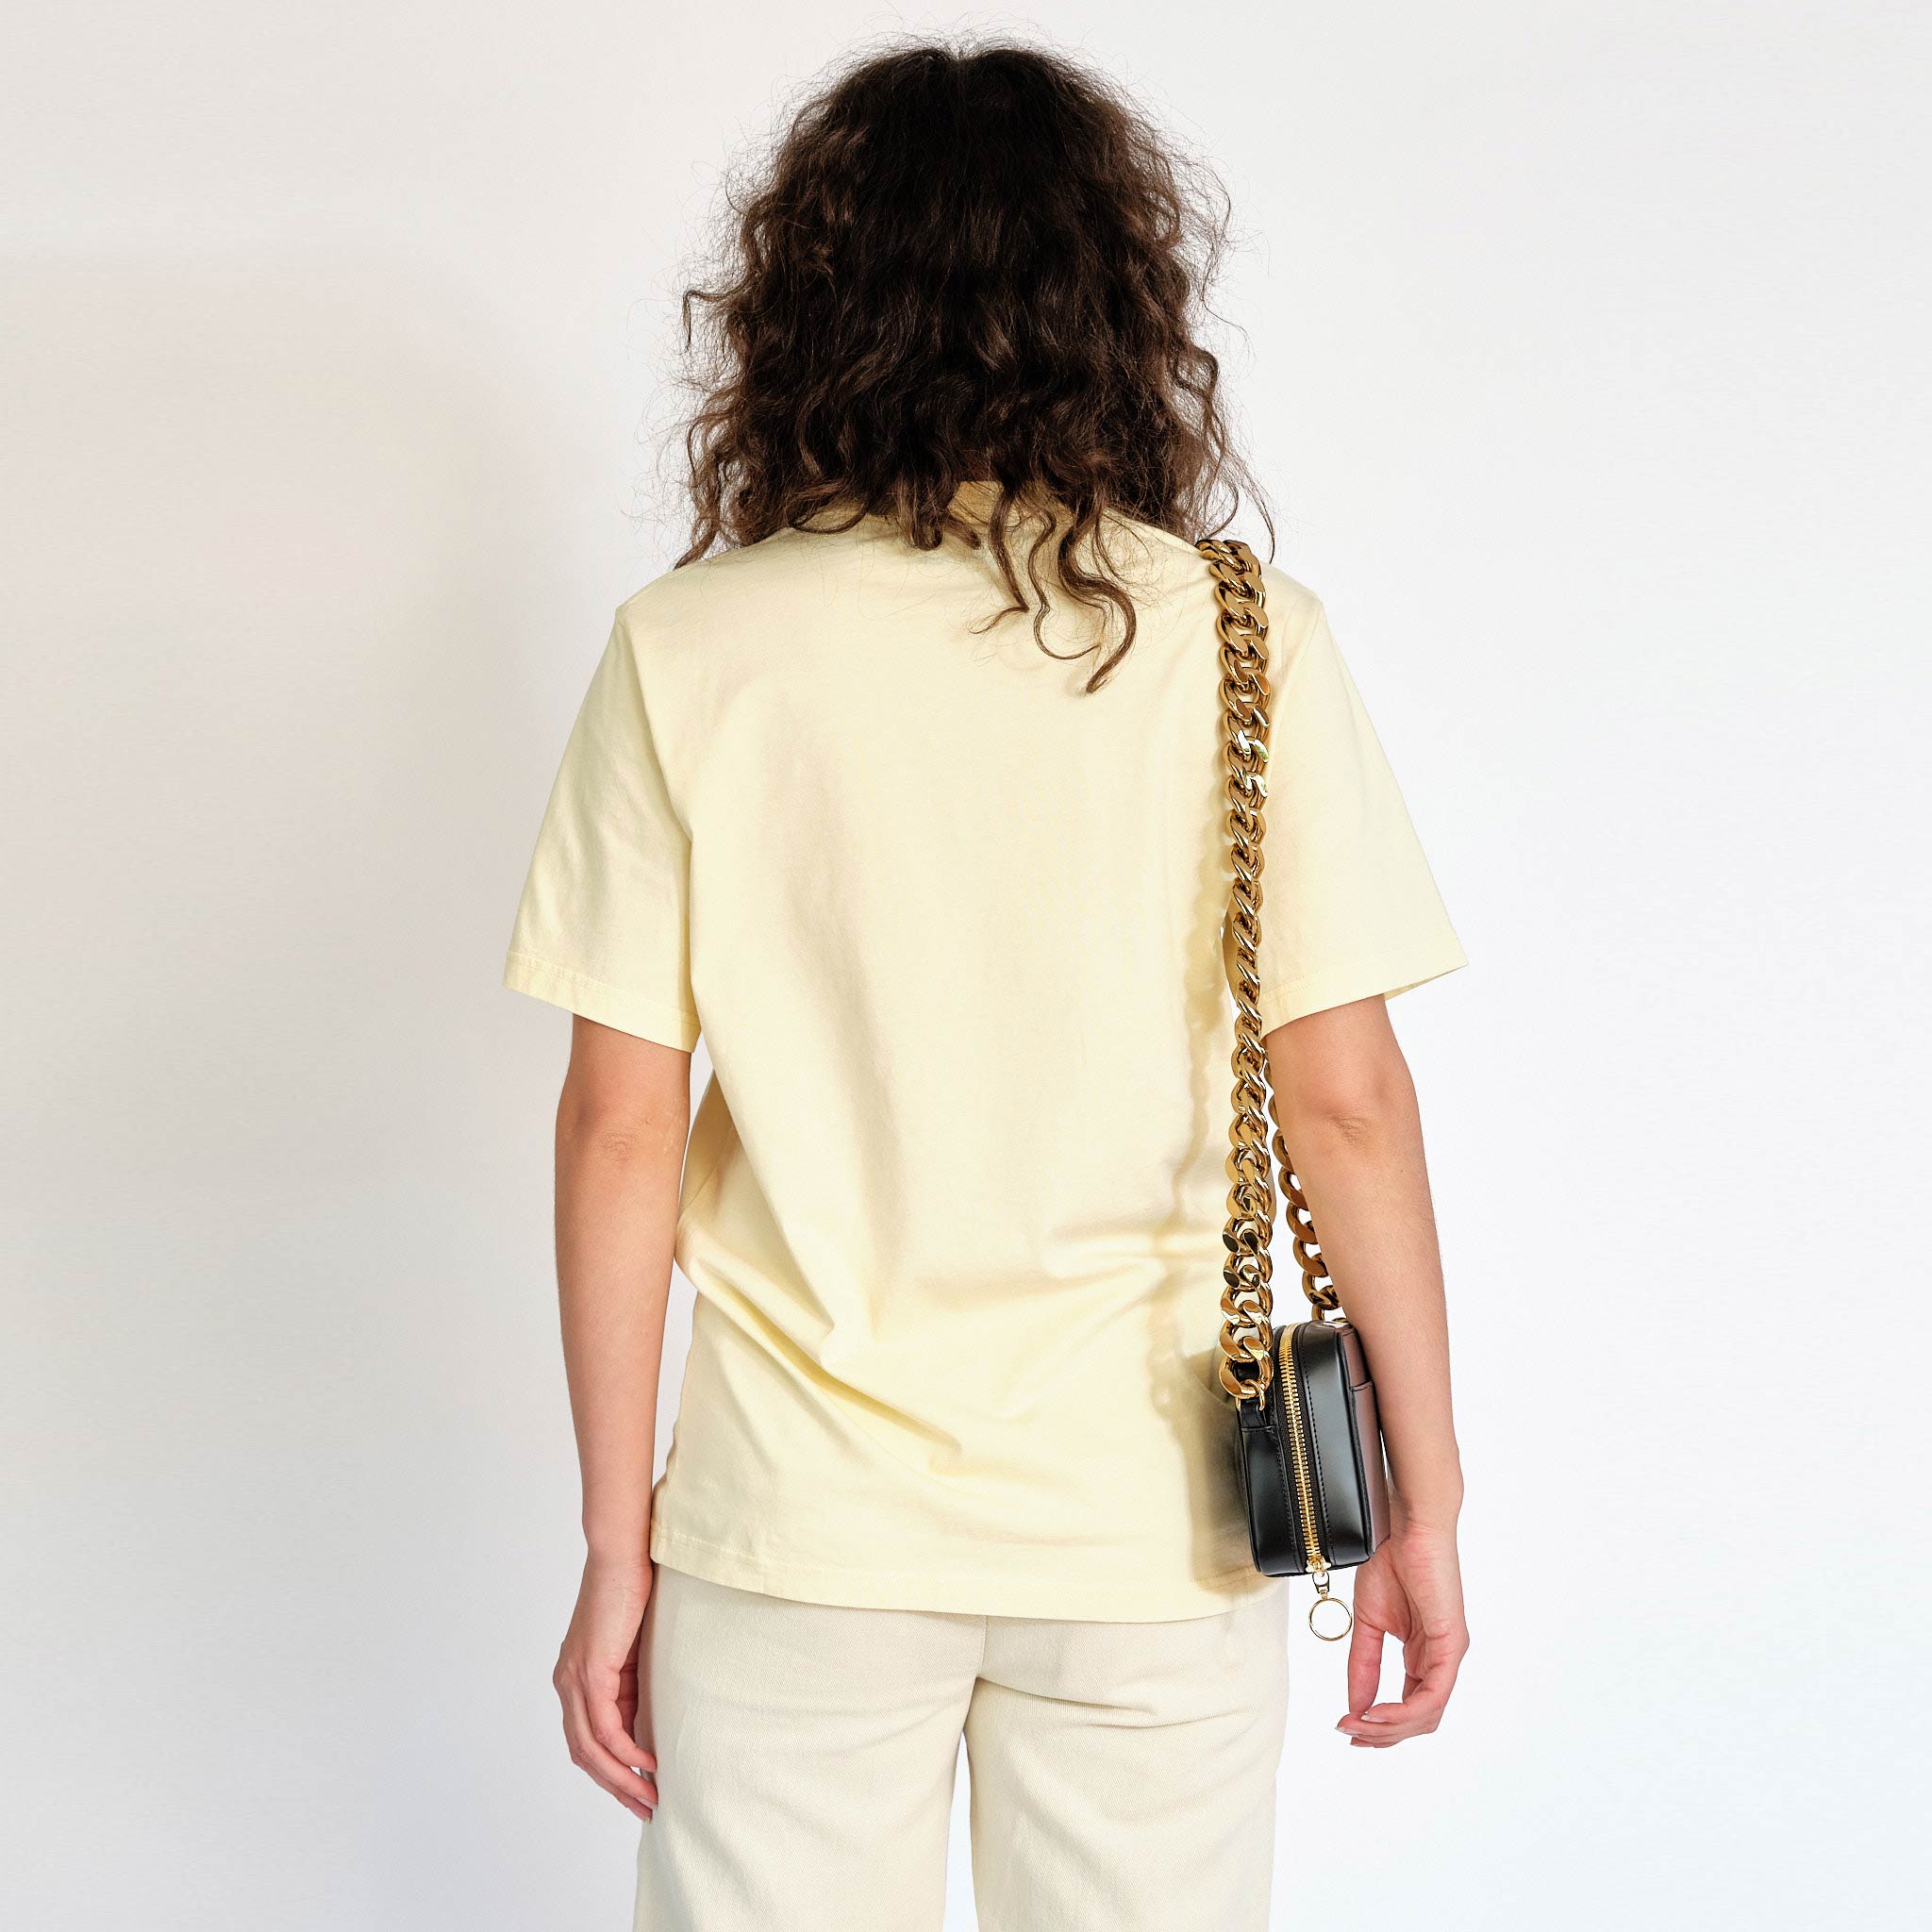 A model wears the light yellow Martine Rose t-shirt featuring a sock puppet graphic and the words Eager Beaver on the front chest - back view.